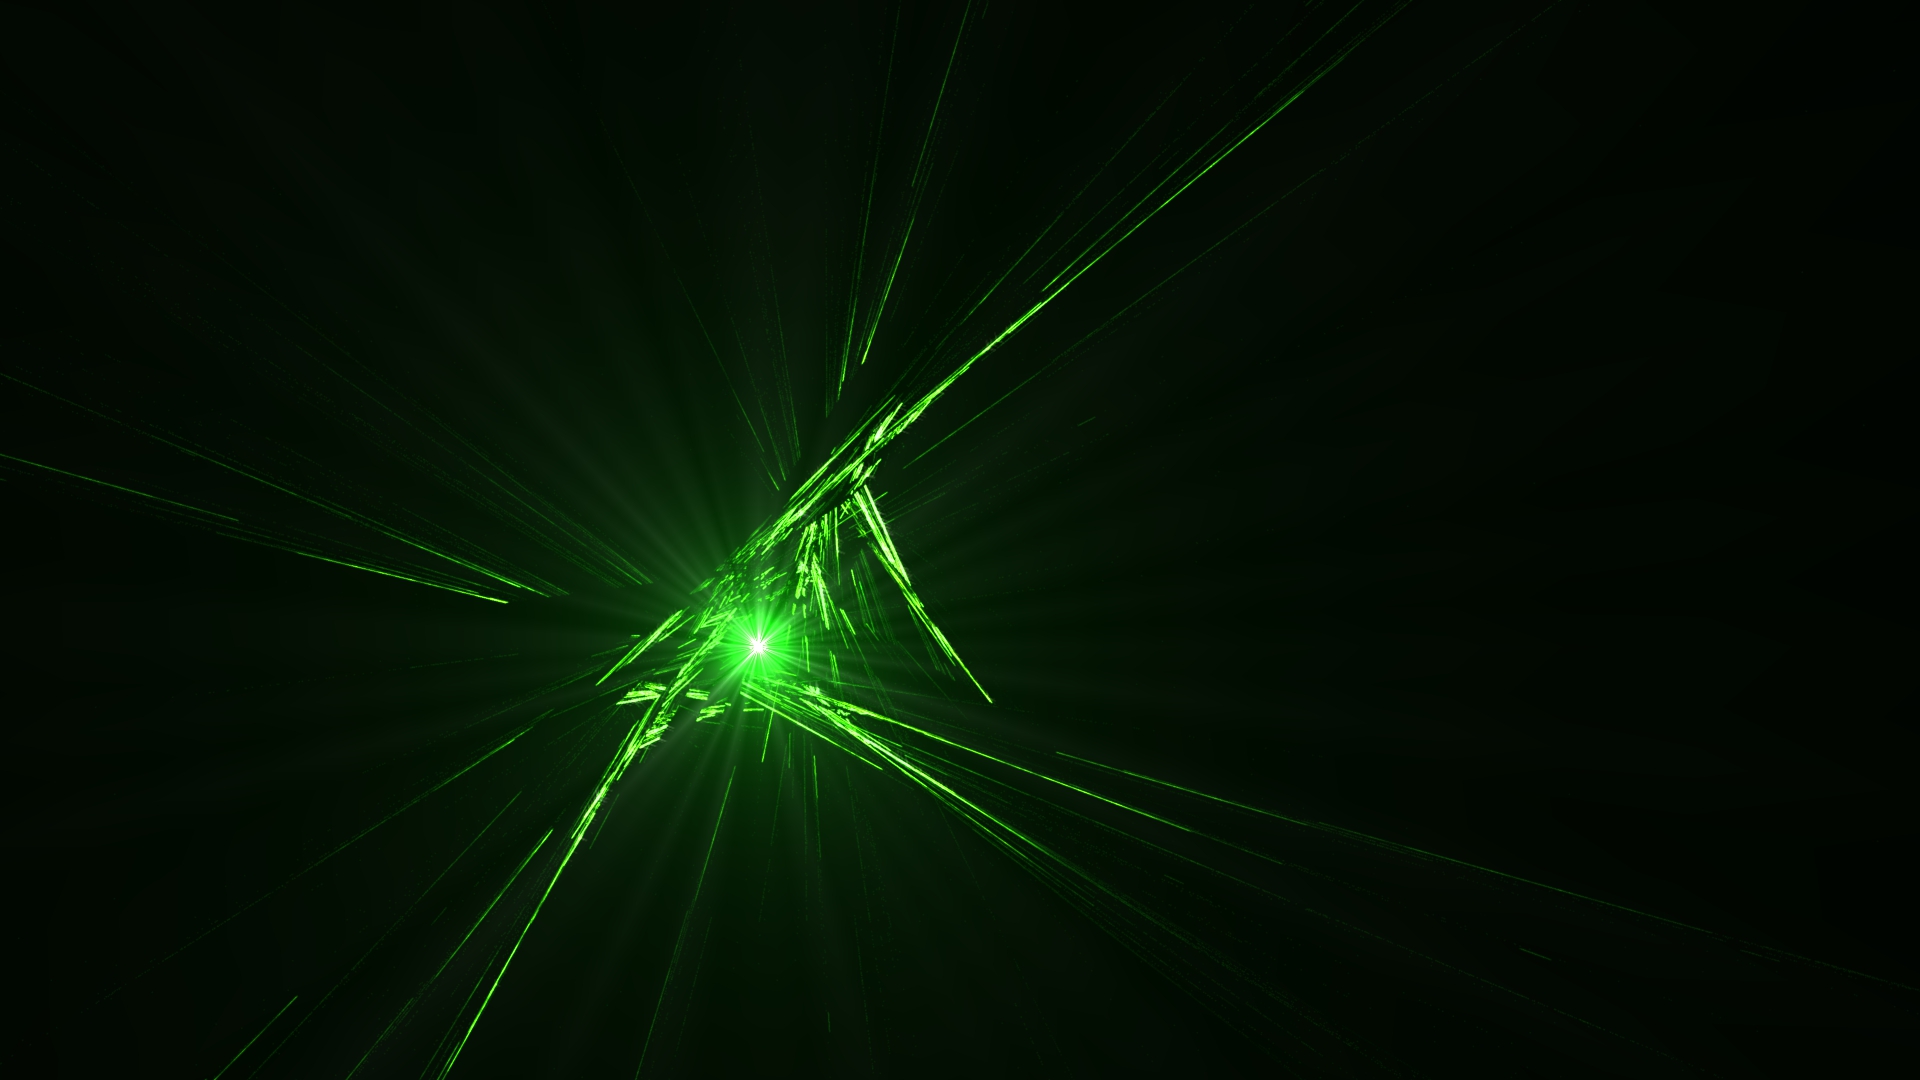 Metalic Green Abstract Graphic